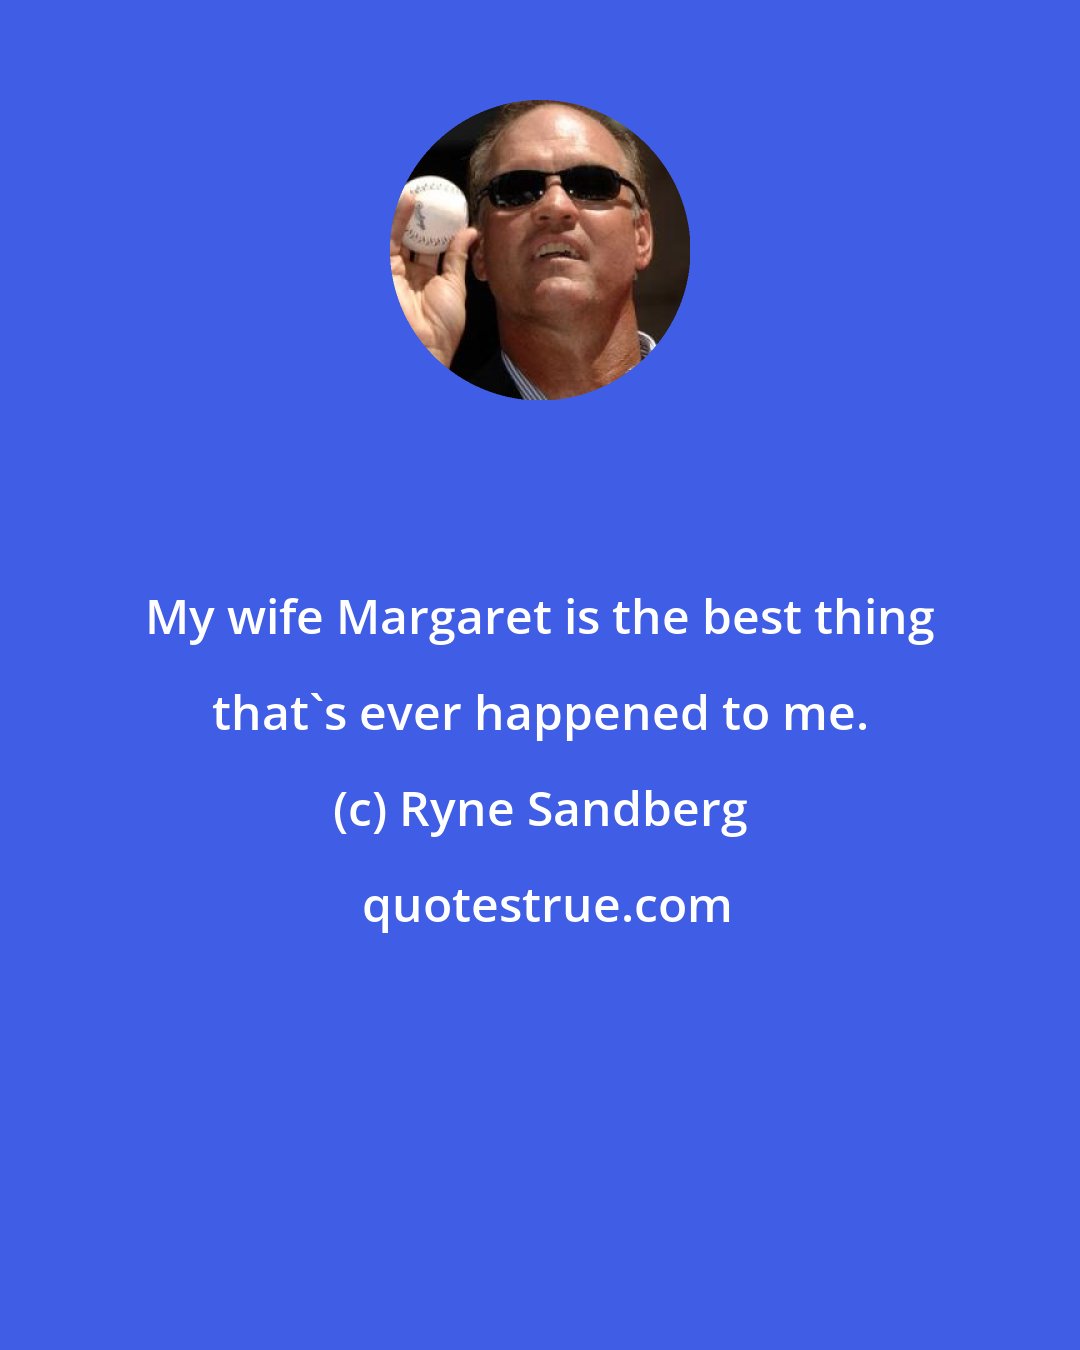 Ryne Sandberg: My wife Margaret is the best thing that's ever happened to me.